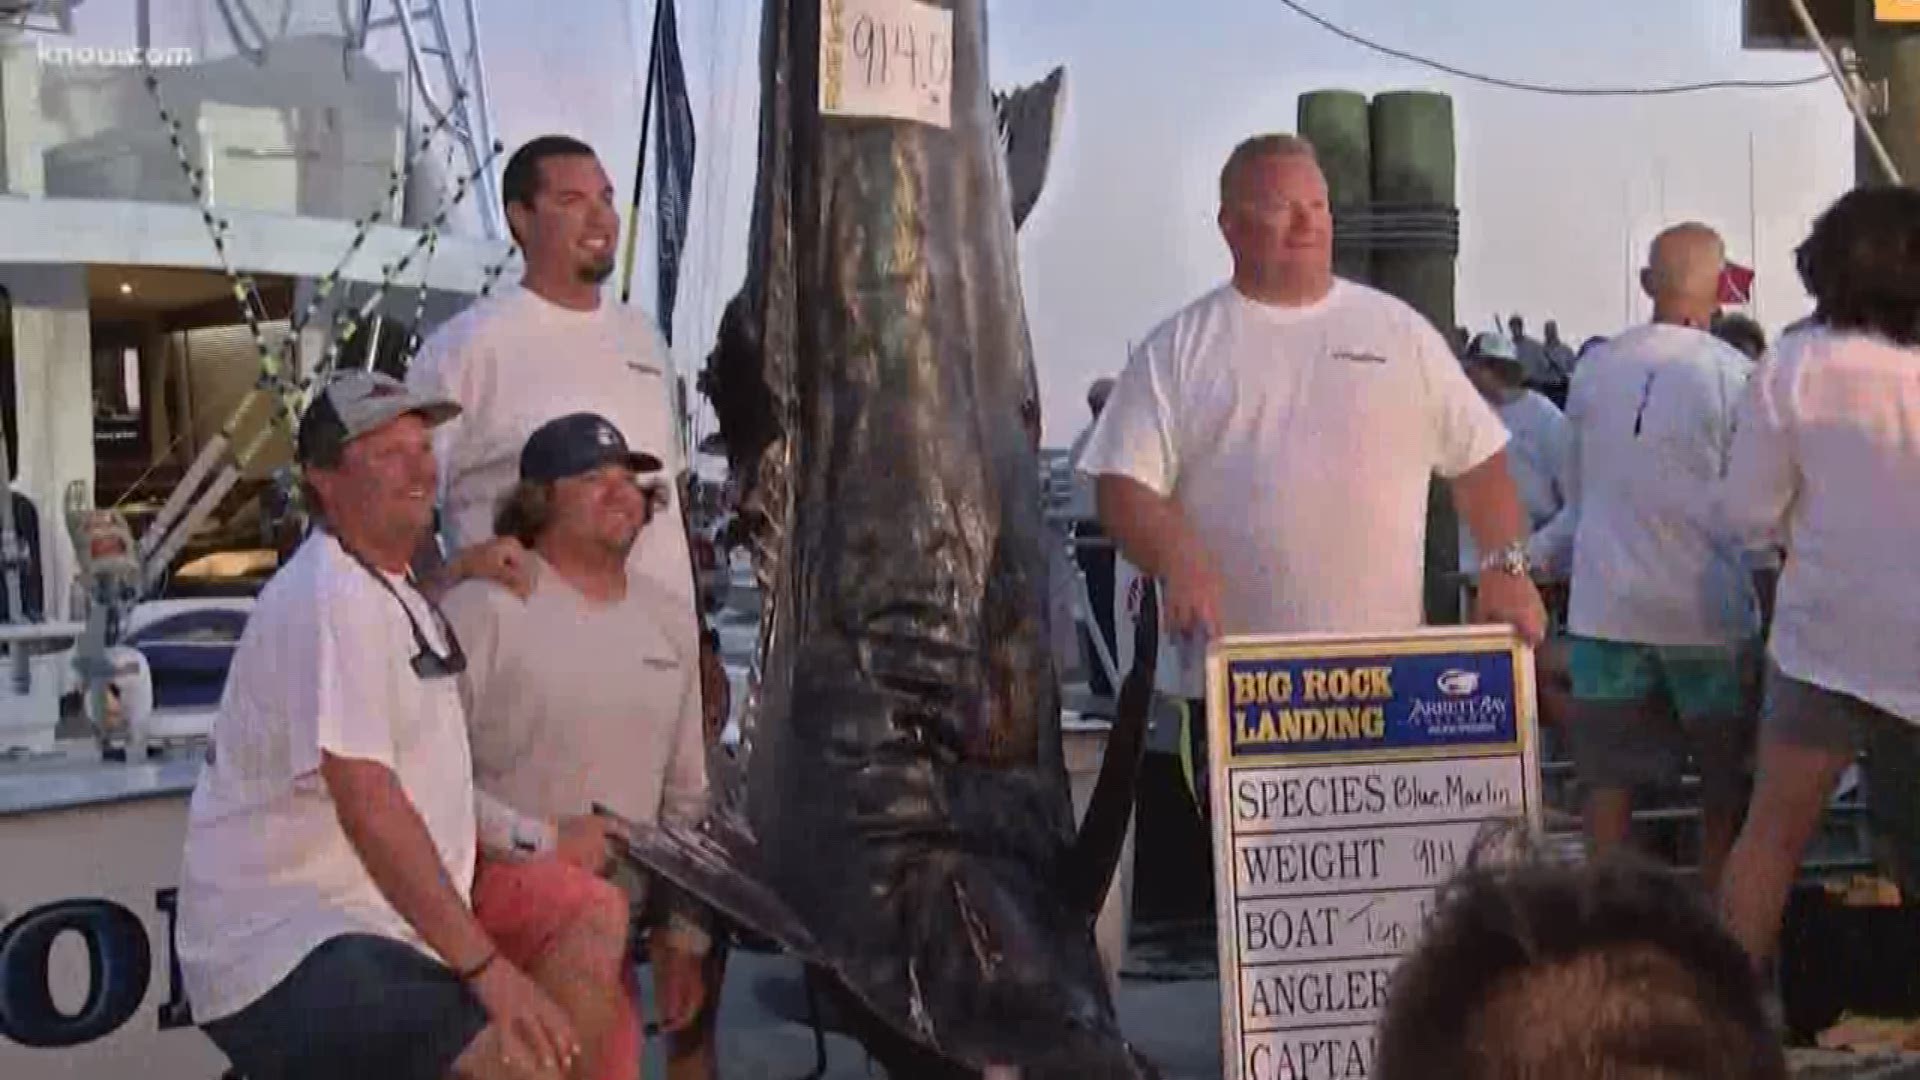 A massive, 914-pound was caught at a fishing tournament in North Carolina. The angler who caught it said it was only fitting this happened on Father's Day weekend. His father, who died four months ago, is the one who got him started fishing. It took 5 1/2 hours of fighting to get the fish on the boat.